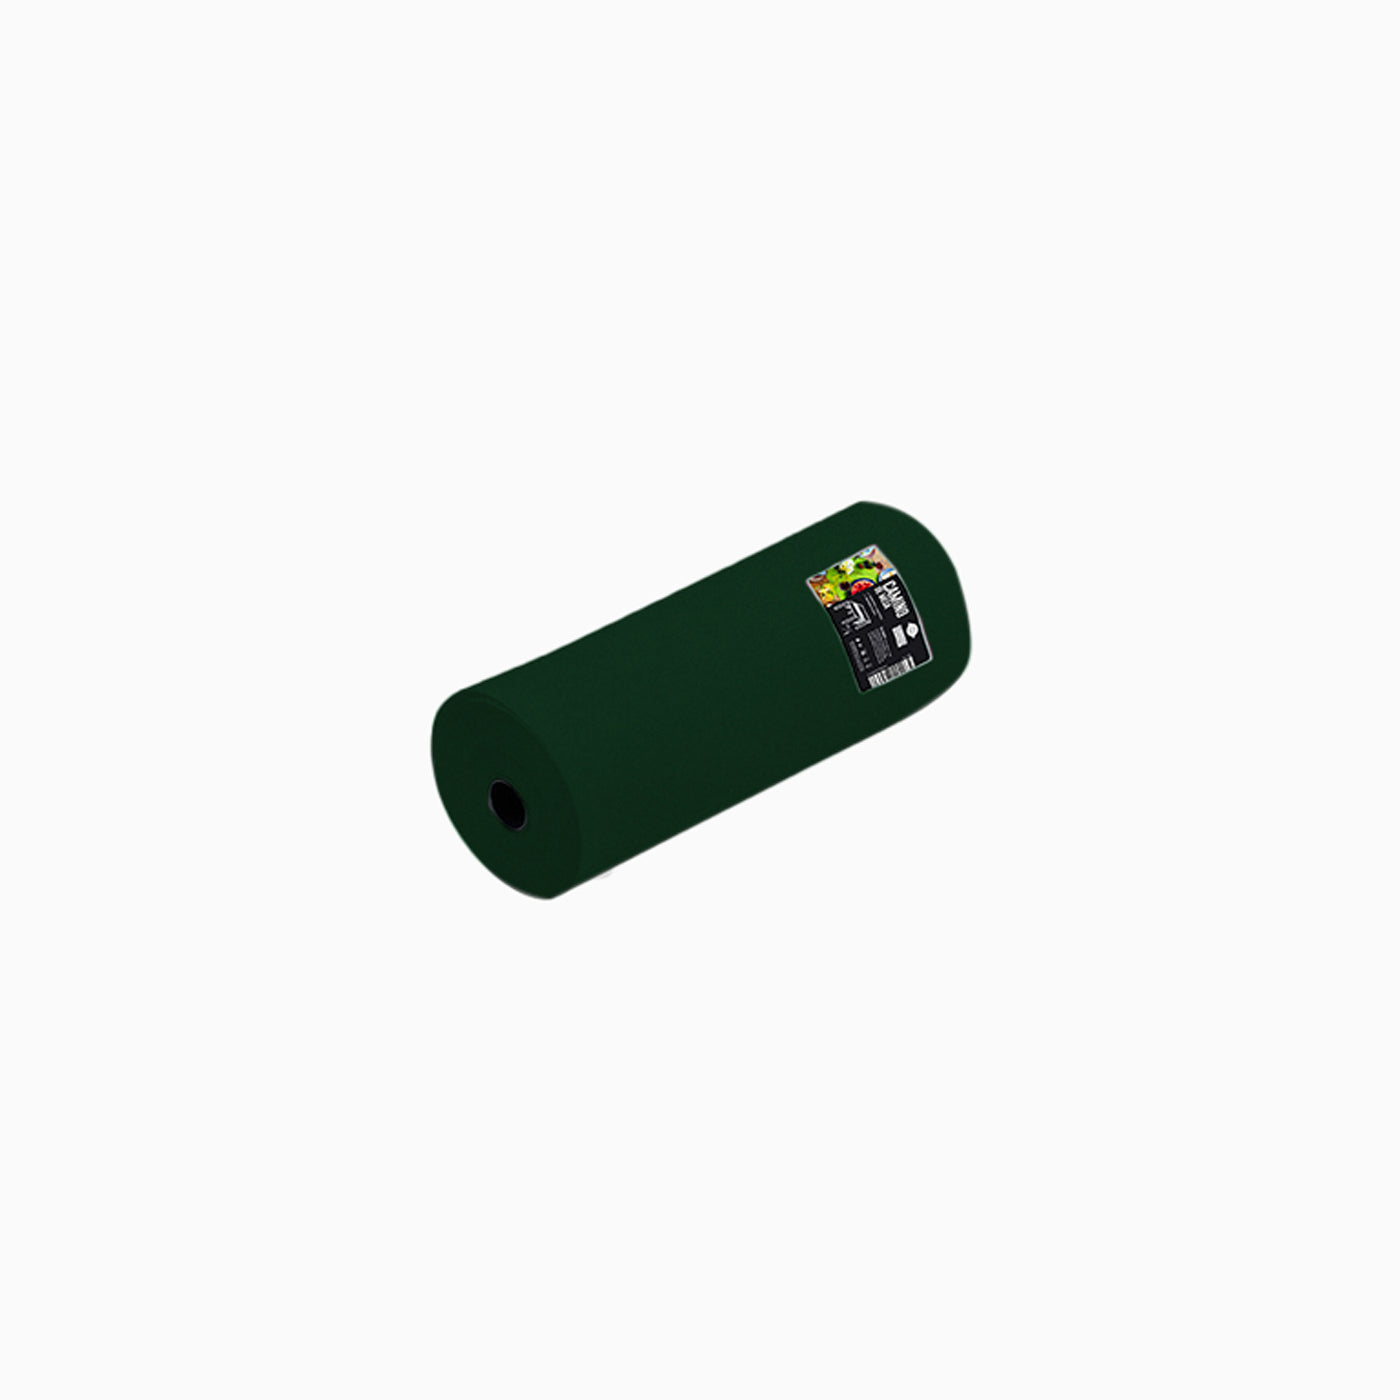 TNT Table Road Roll of 12M with Precort to 0.30cm Dark Green